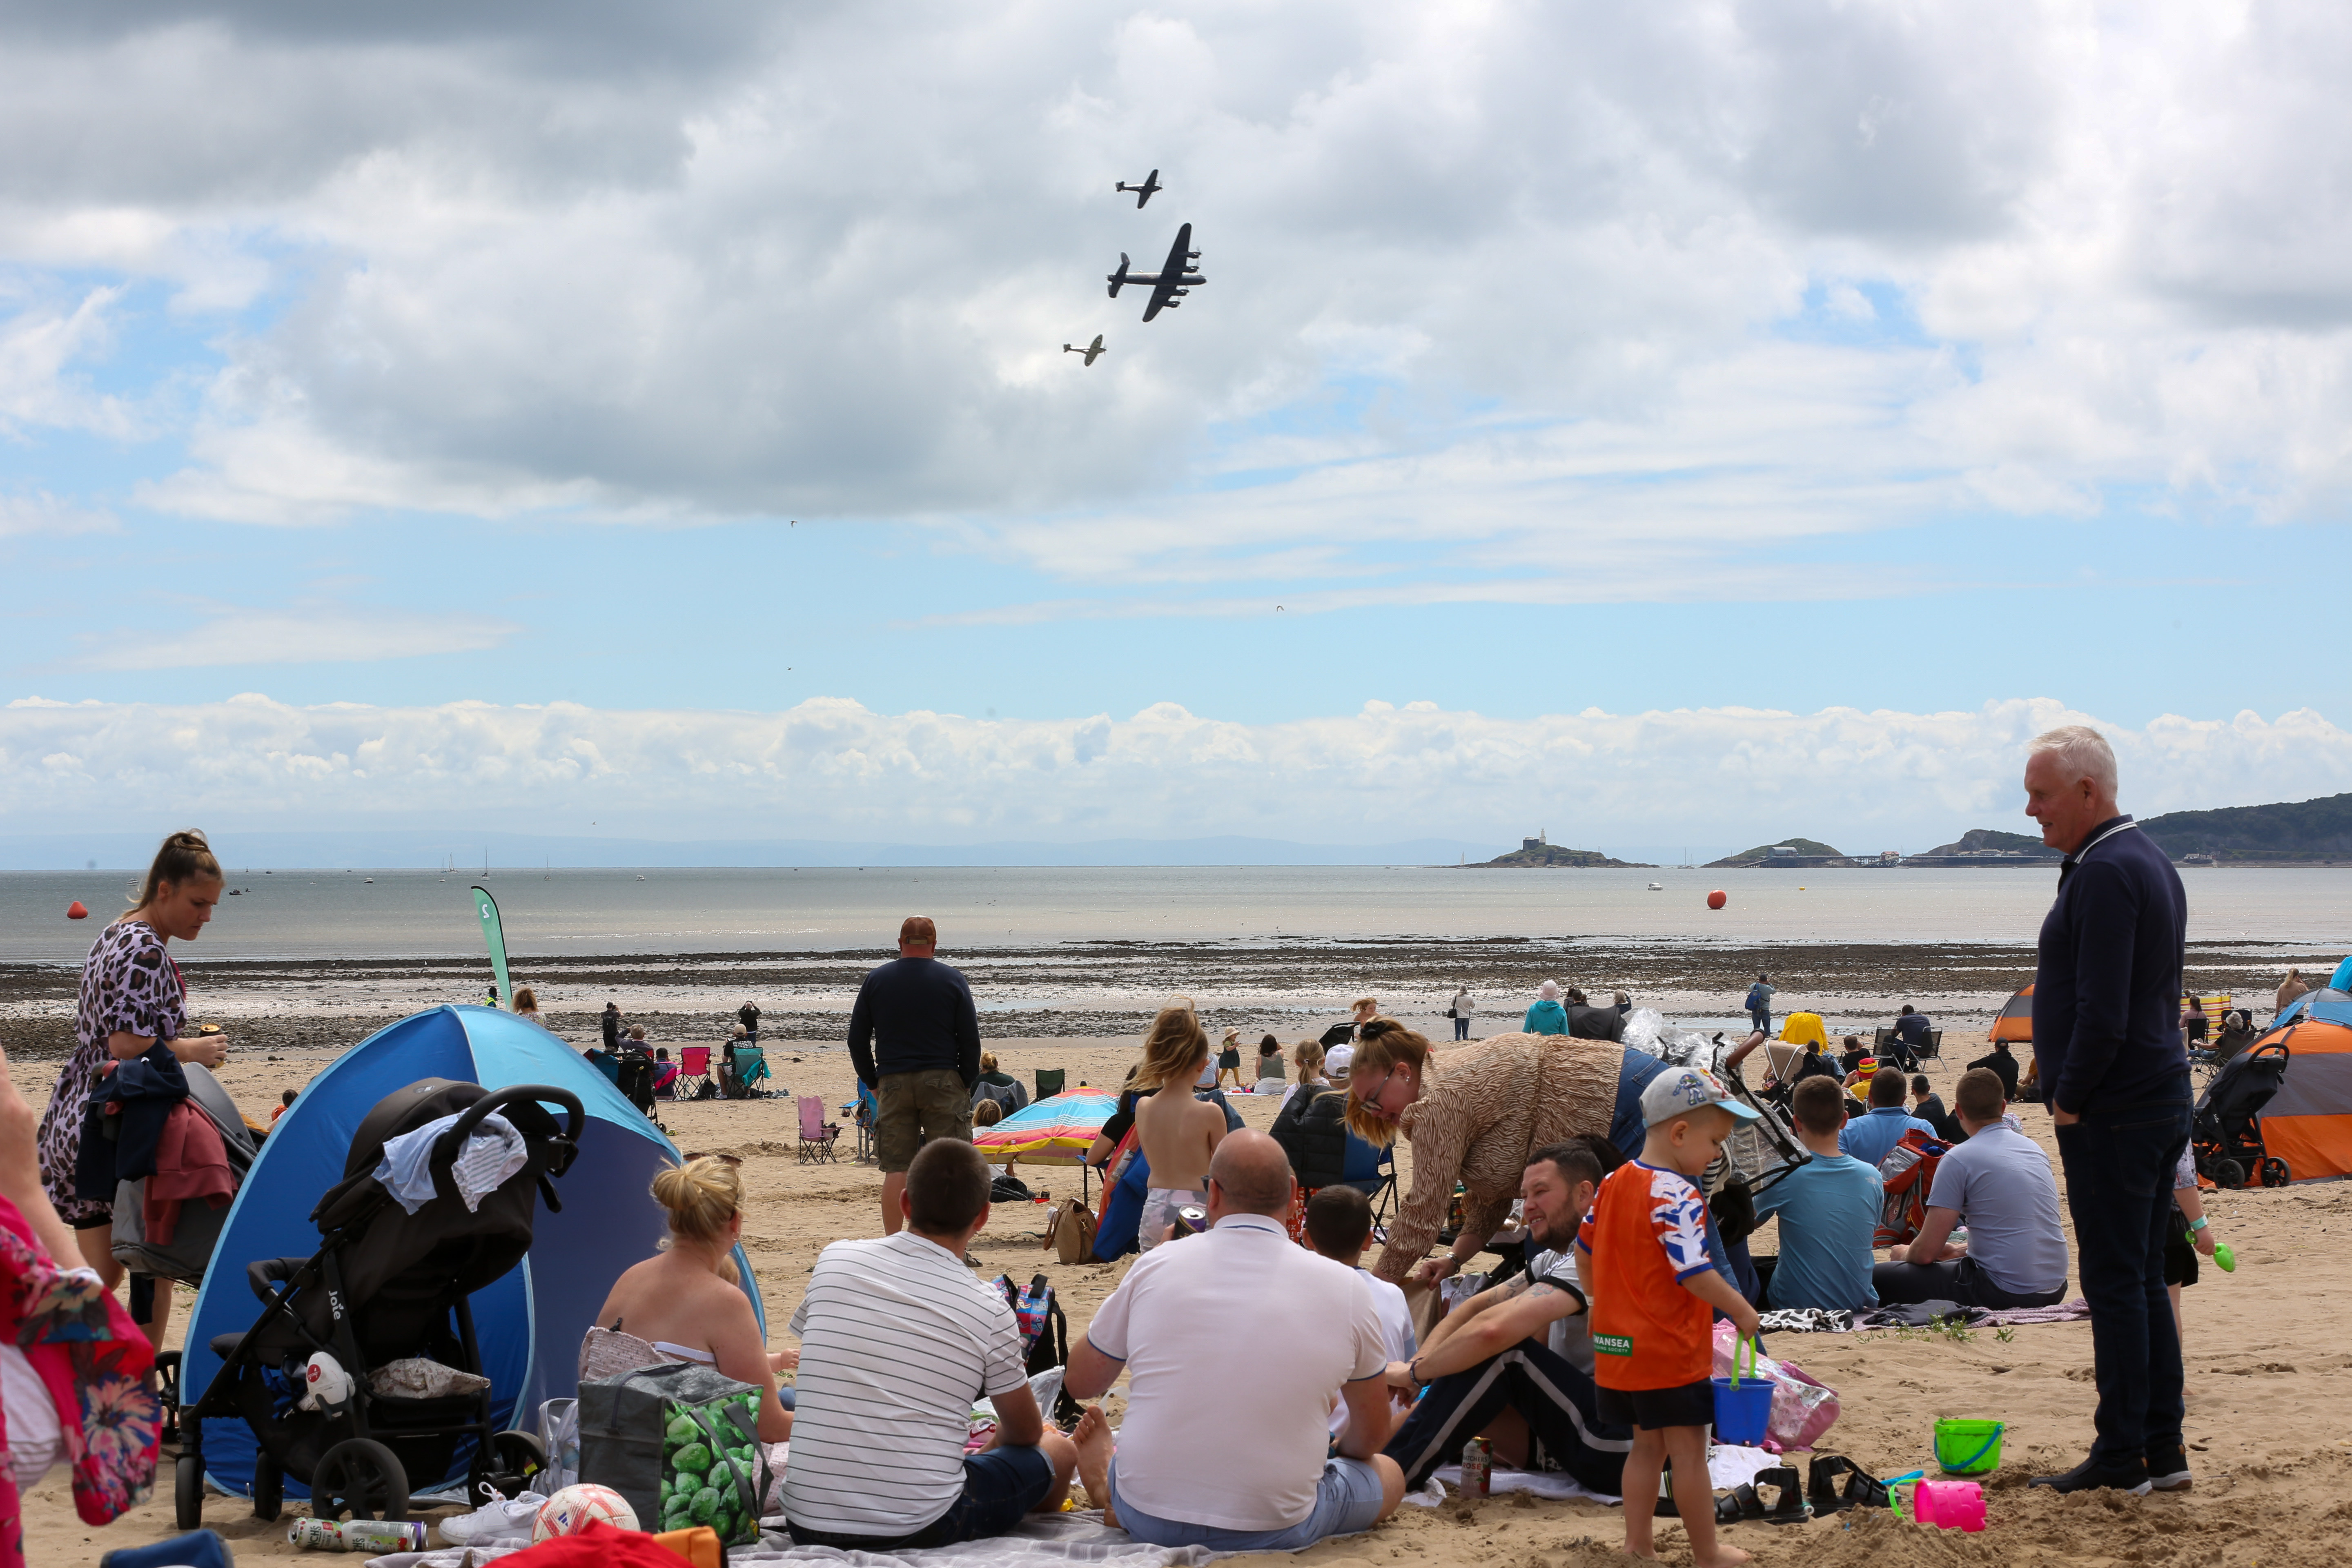 Image shows a Lancaster and two Spitfires flypast over the public beach.